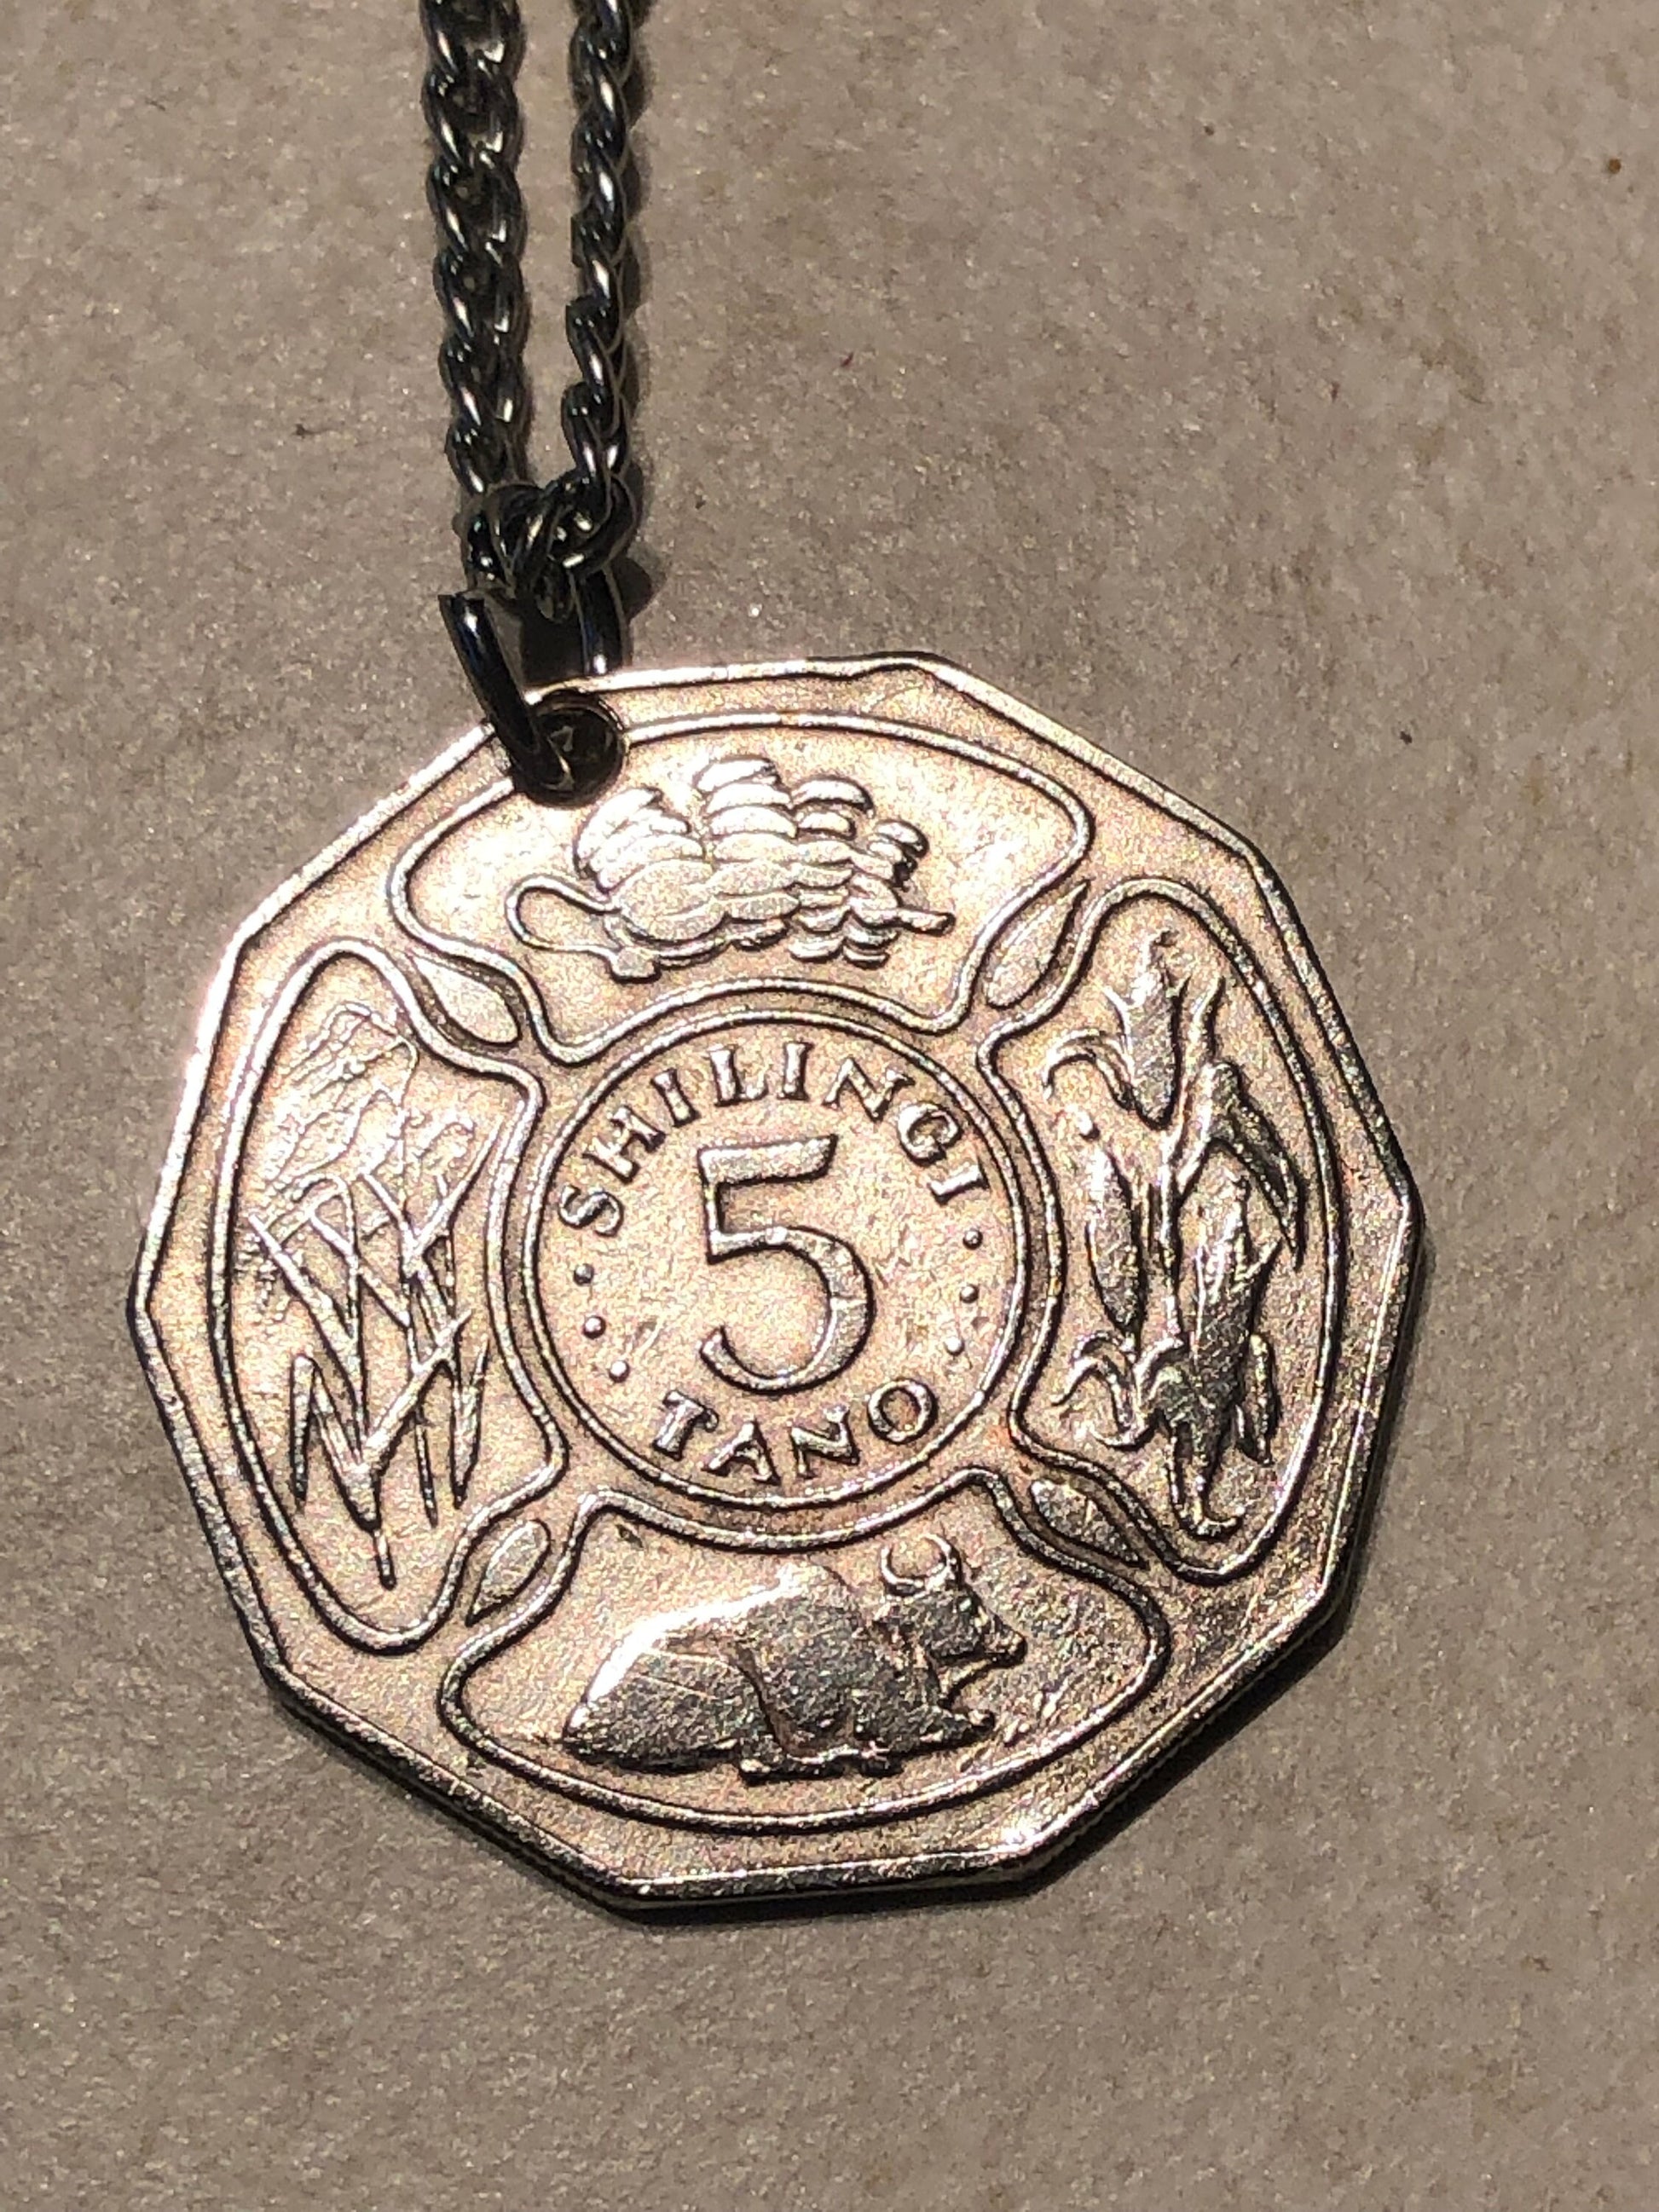 Tanzania Coin Pendant Necklace Tanzanian 5 1971 Tano Shilling Vintage Personal Jewelry Gift Friend Charm For Him Her World Coin Collector